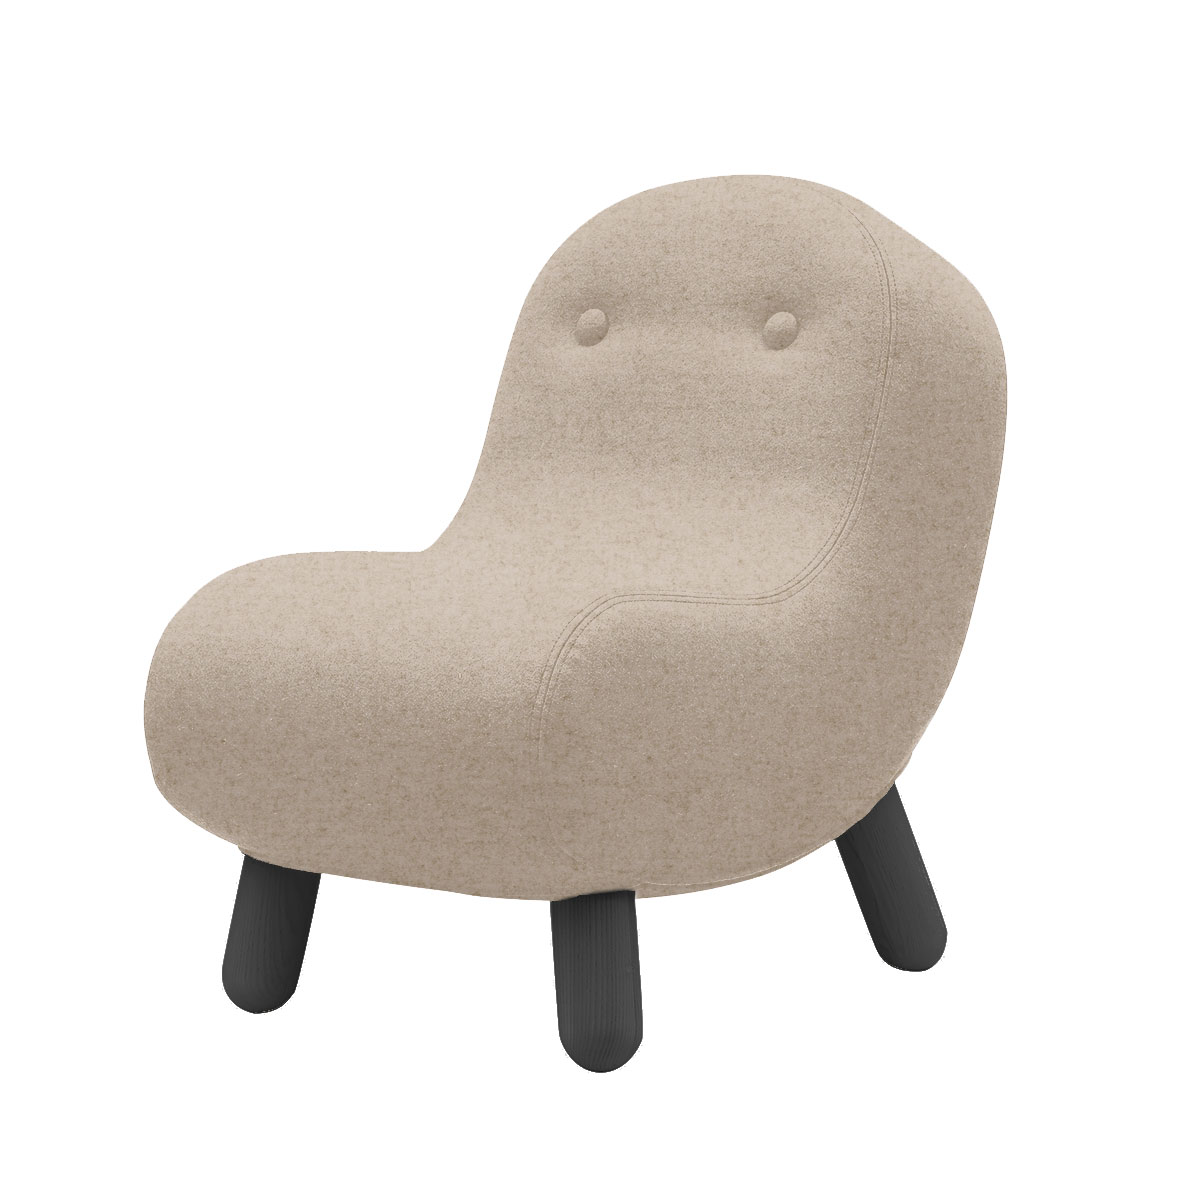 Softline Bob Lounge Chair by Olson and Baker - Designer & Contemporary Sofas, Furniture - Olson and Baker showcases original designs from authentic, designer brands. Buy contemporary furniture, lighting, storage, sofas & chairs at Olson + Baker.